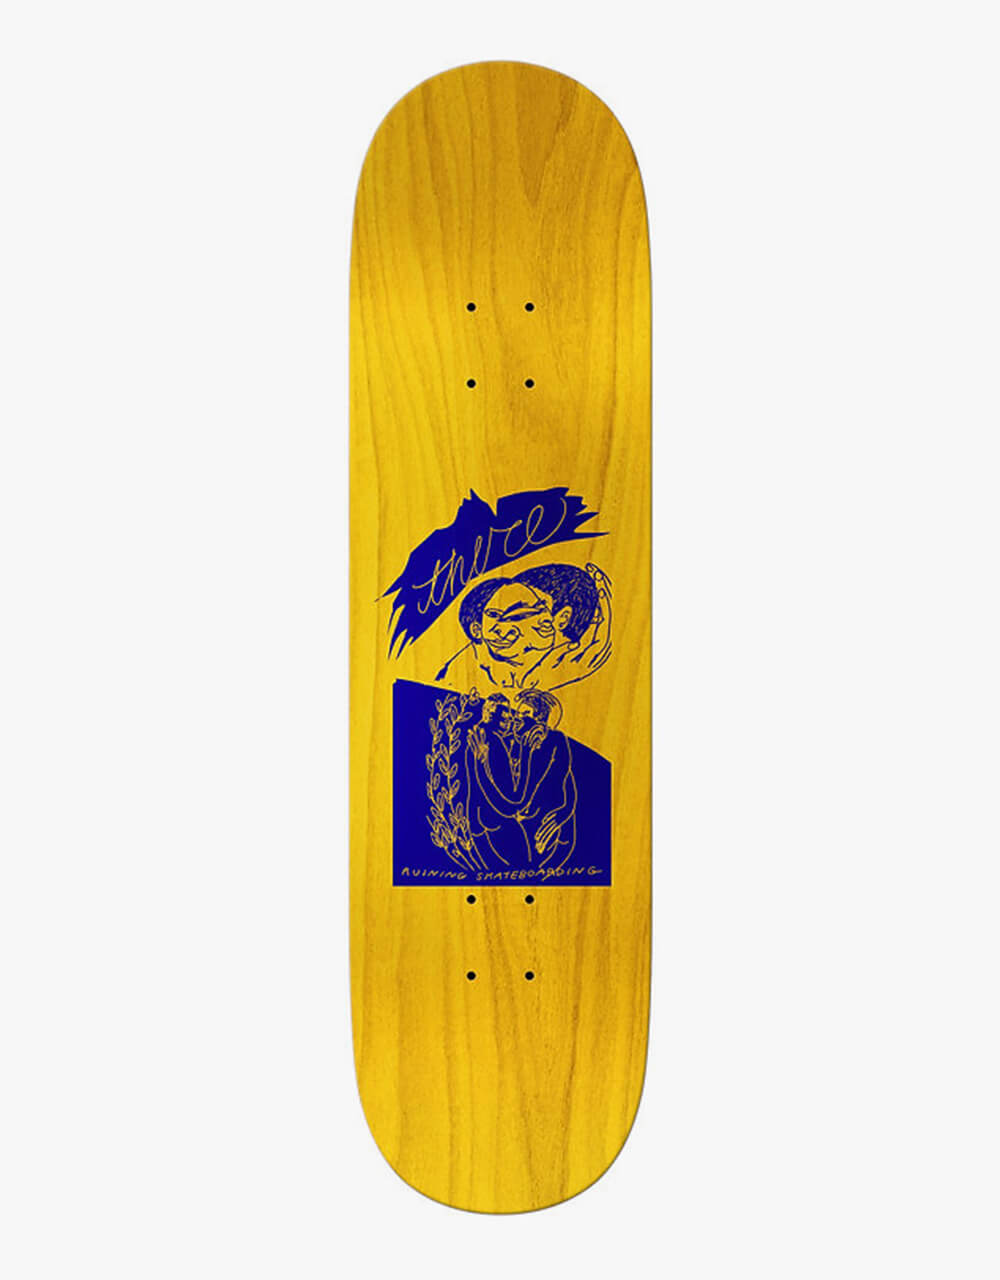 There Colors Skateboard Deck - 8.25"